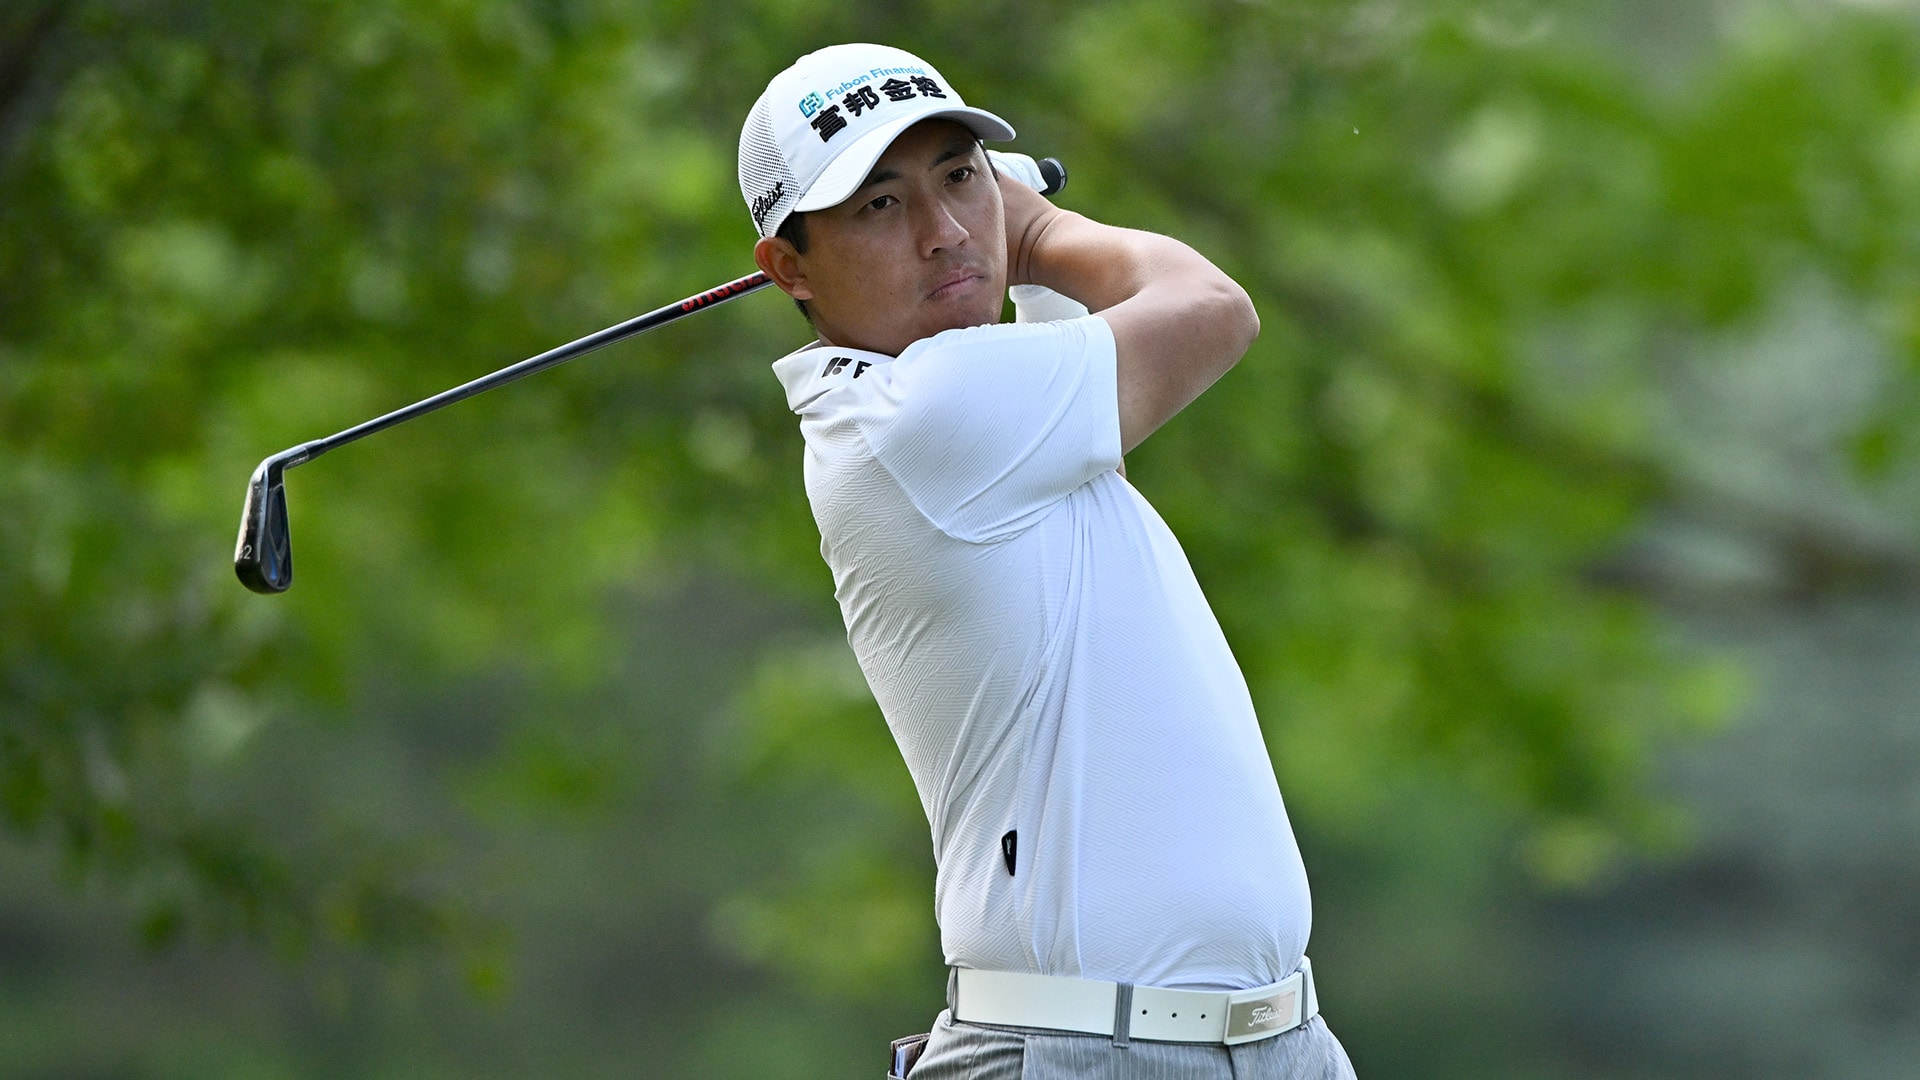 C.T. Pan leads Canadian Open; Rory McIlroy 2 shots back on crowded leaderboard